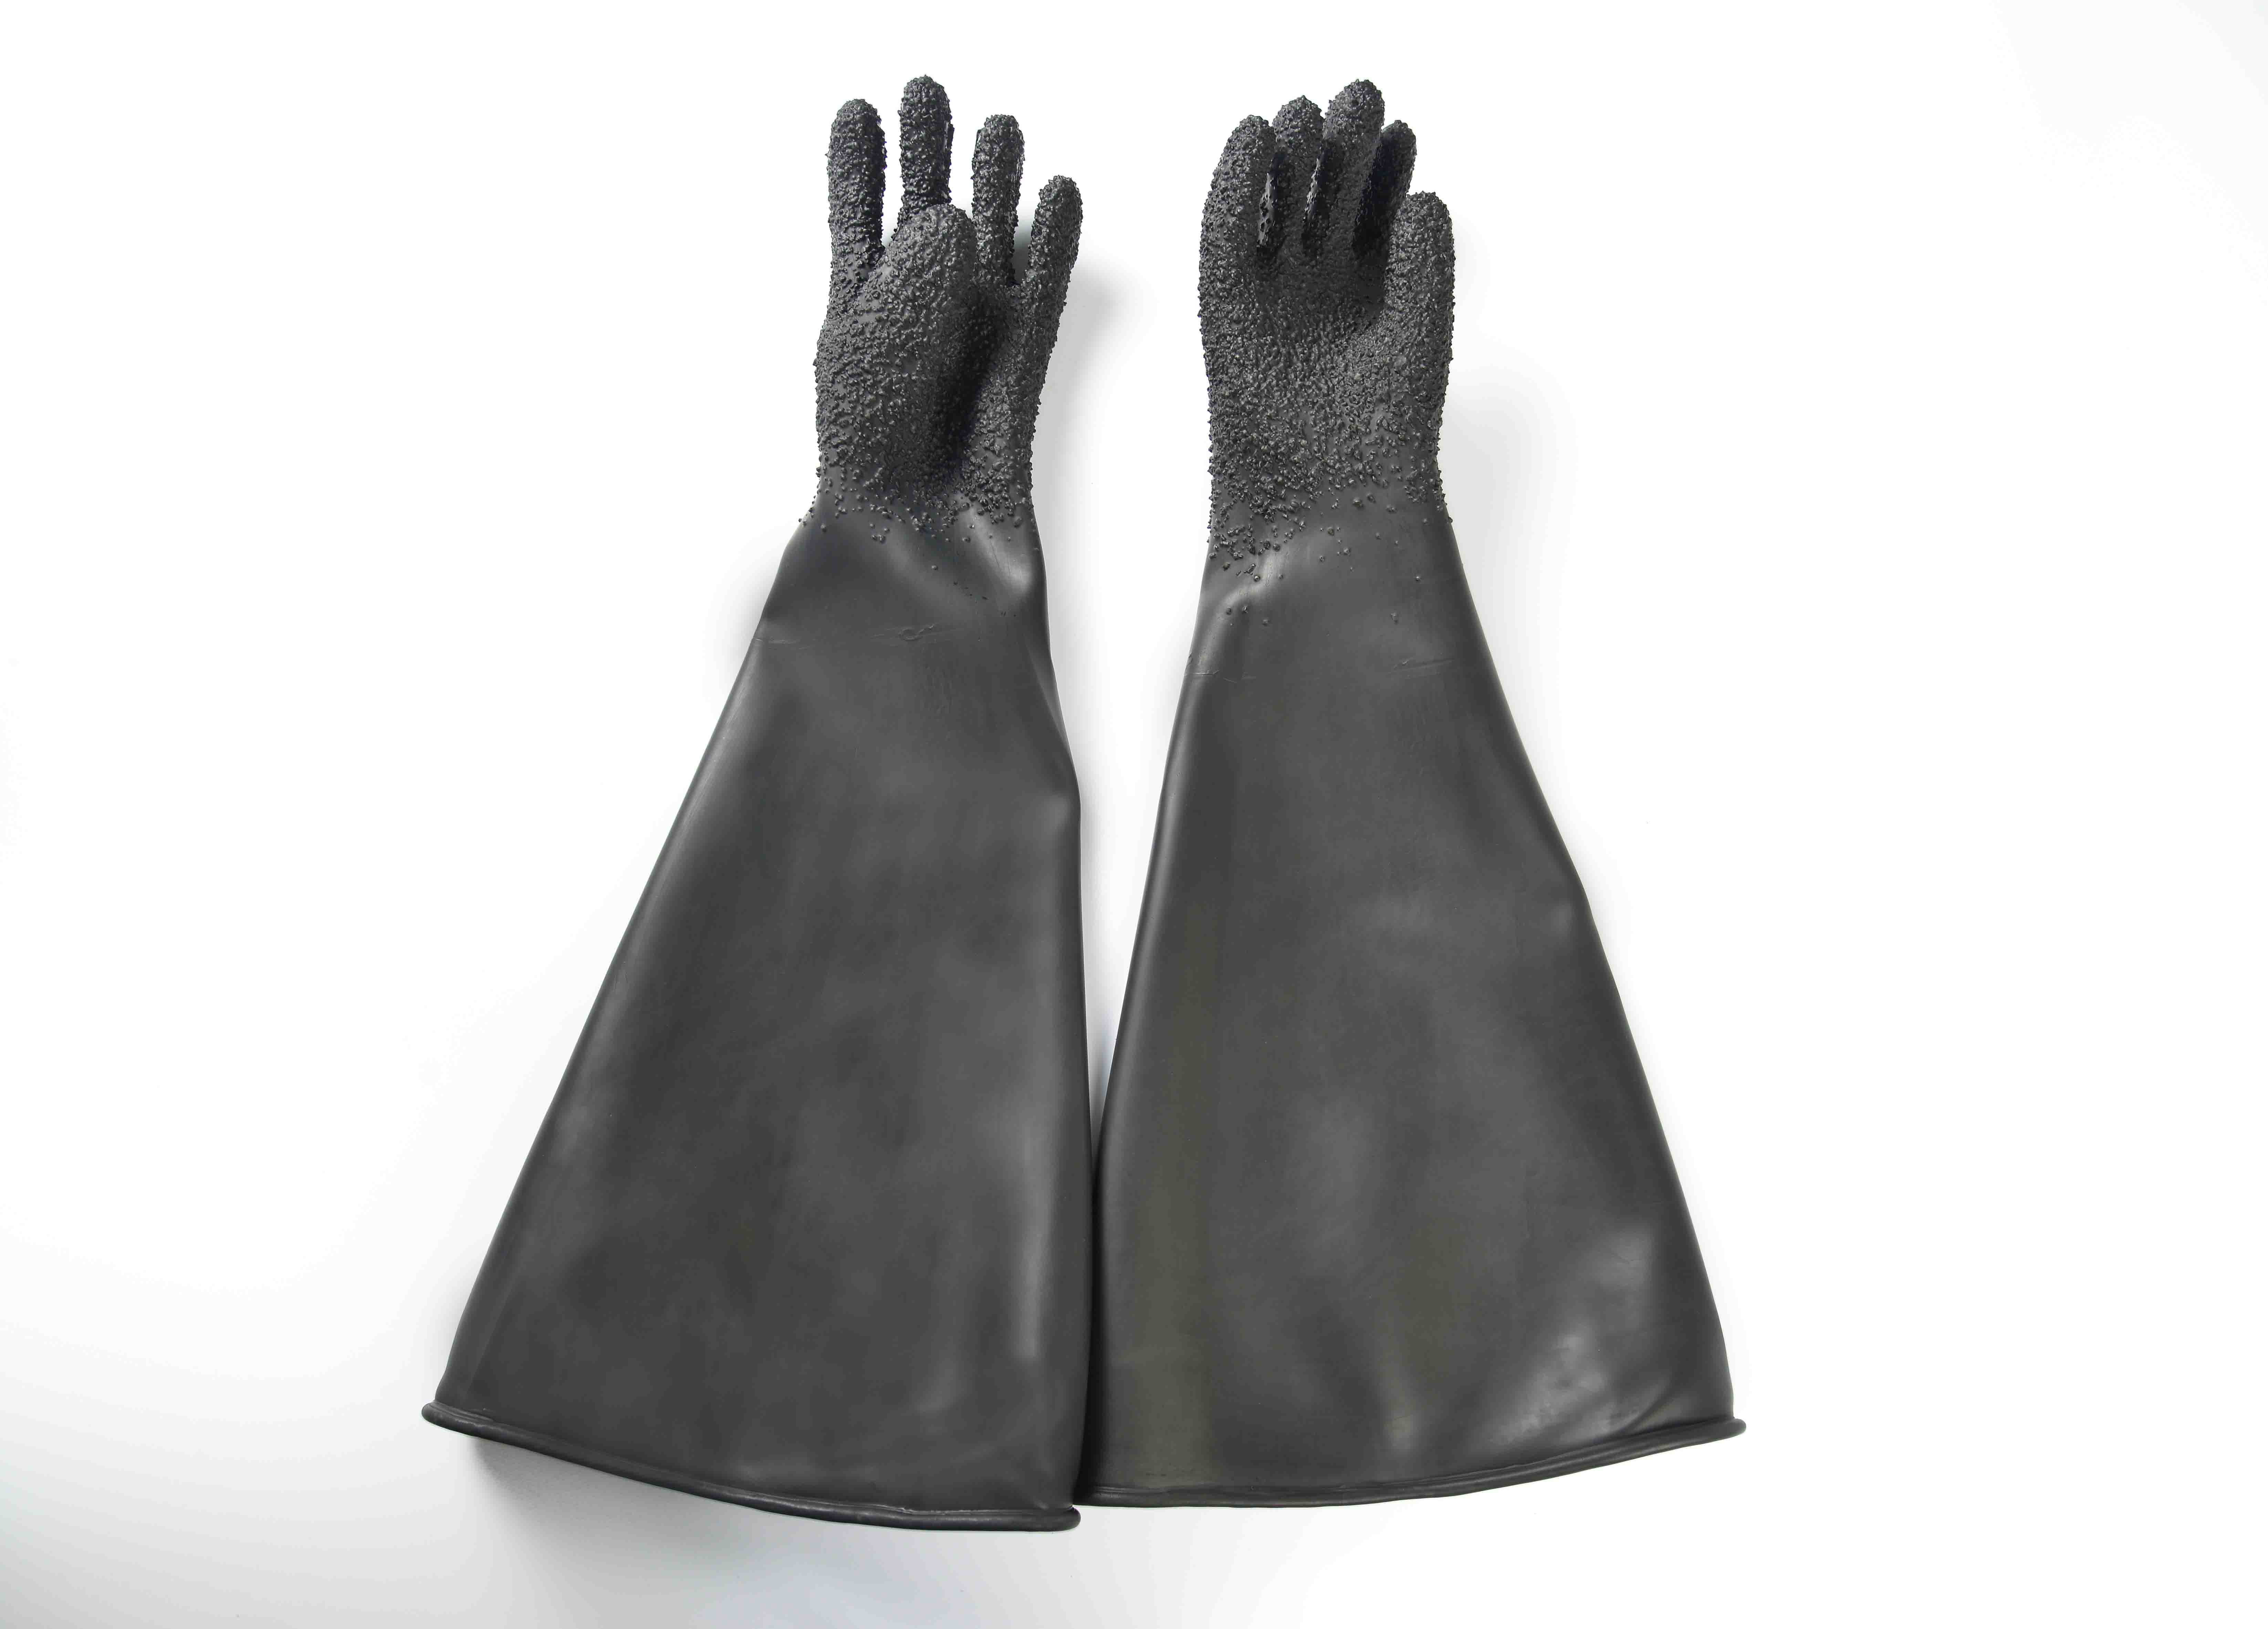 Chinese wholesale 26″ Industrial rubber glove-Granule finish to kazan Manufacturer